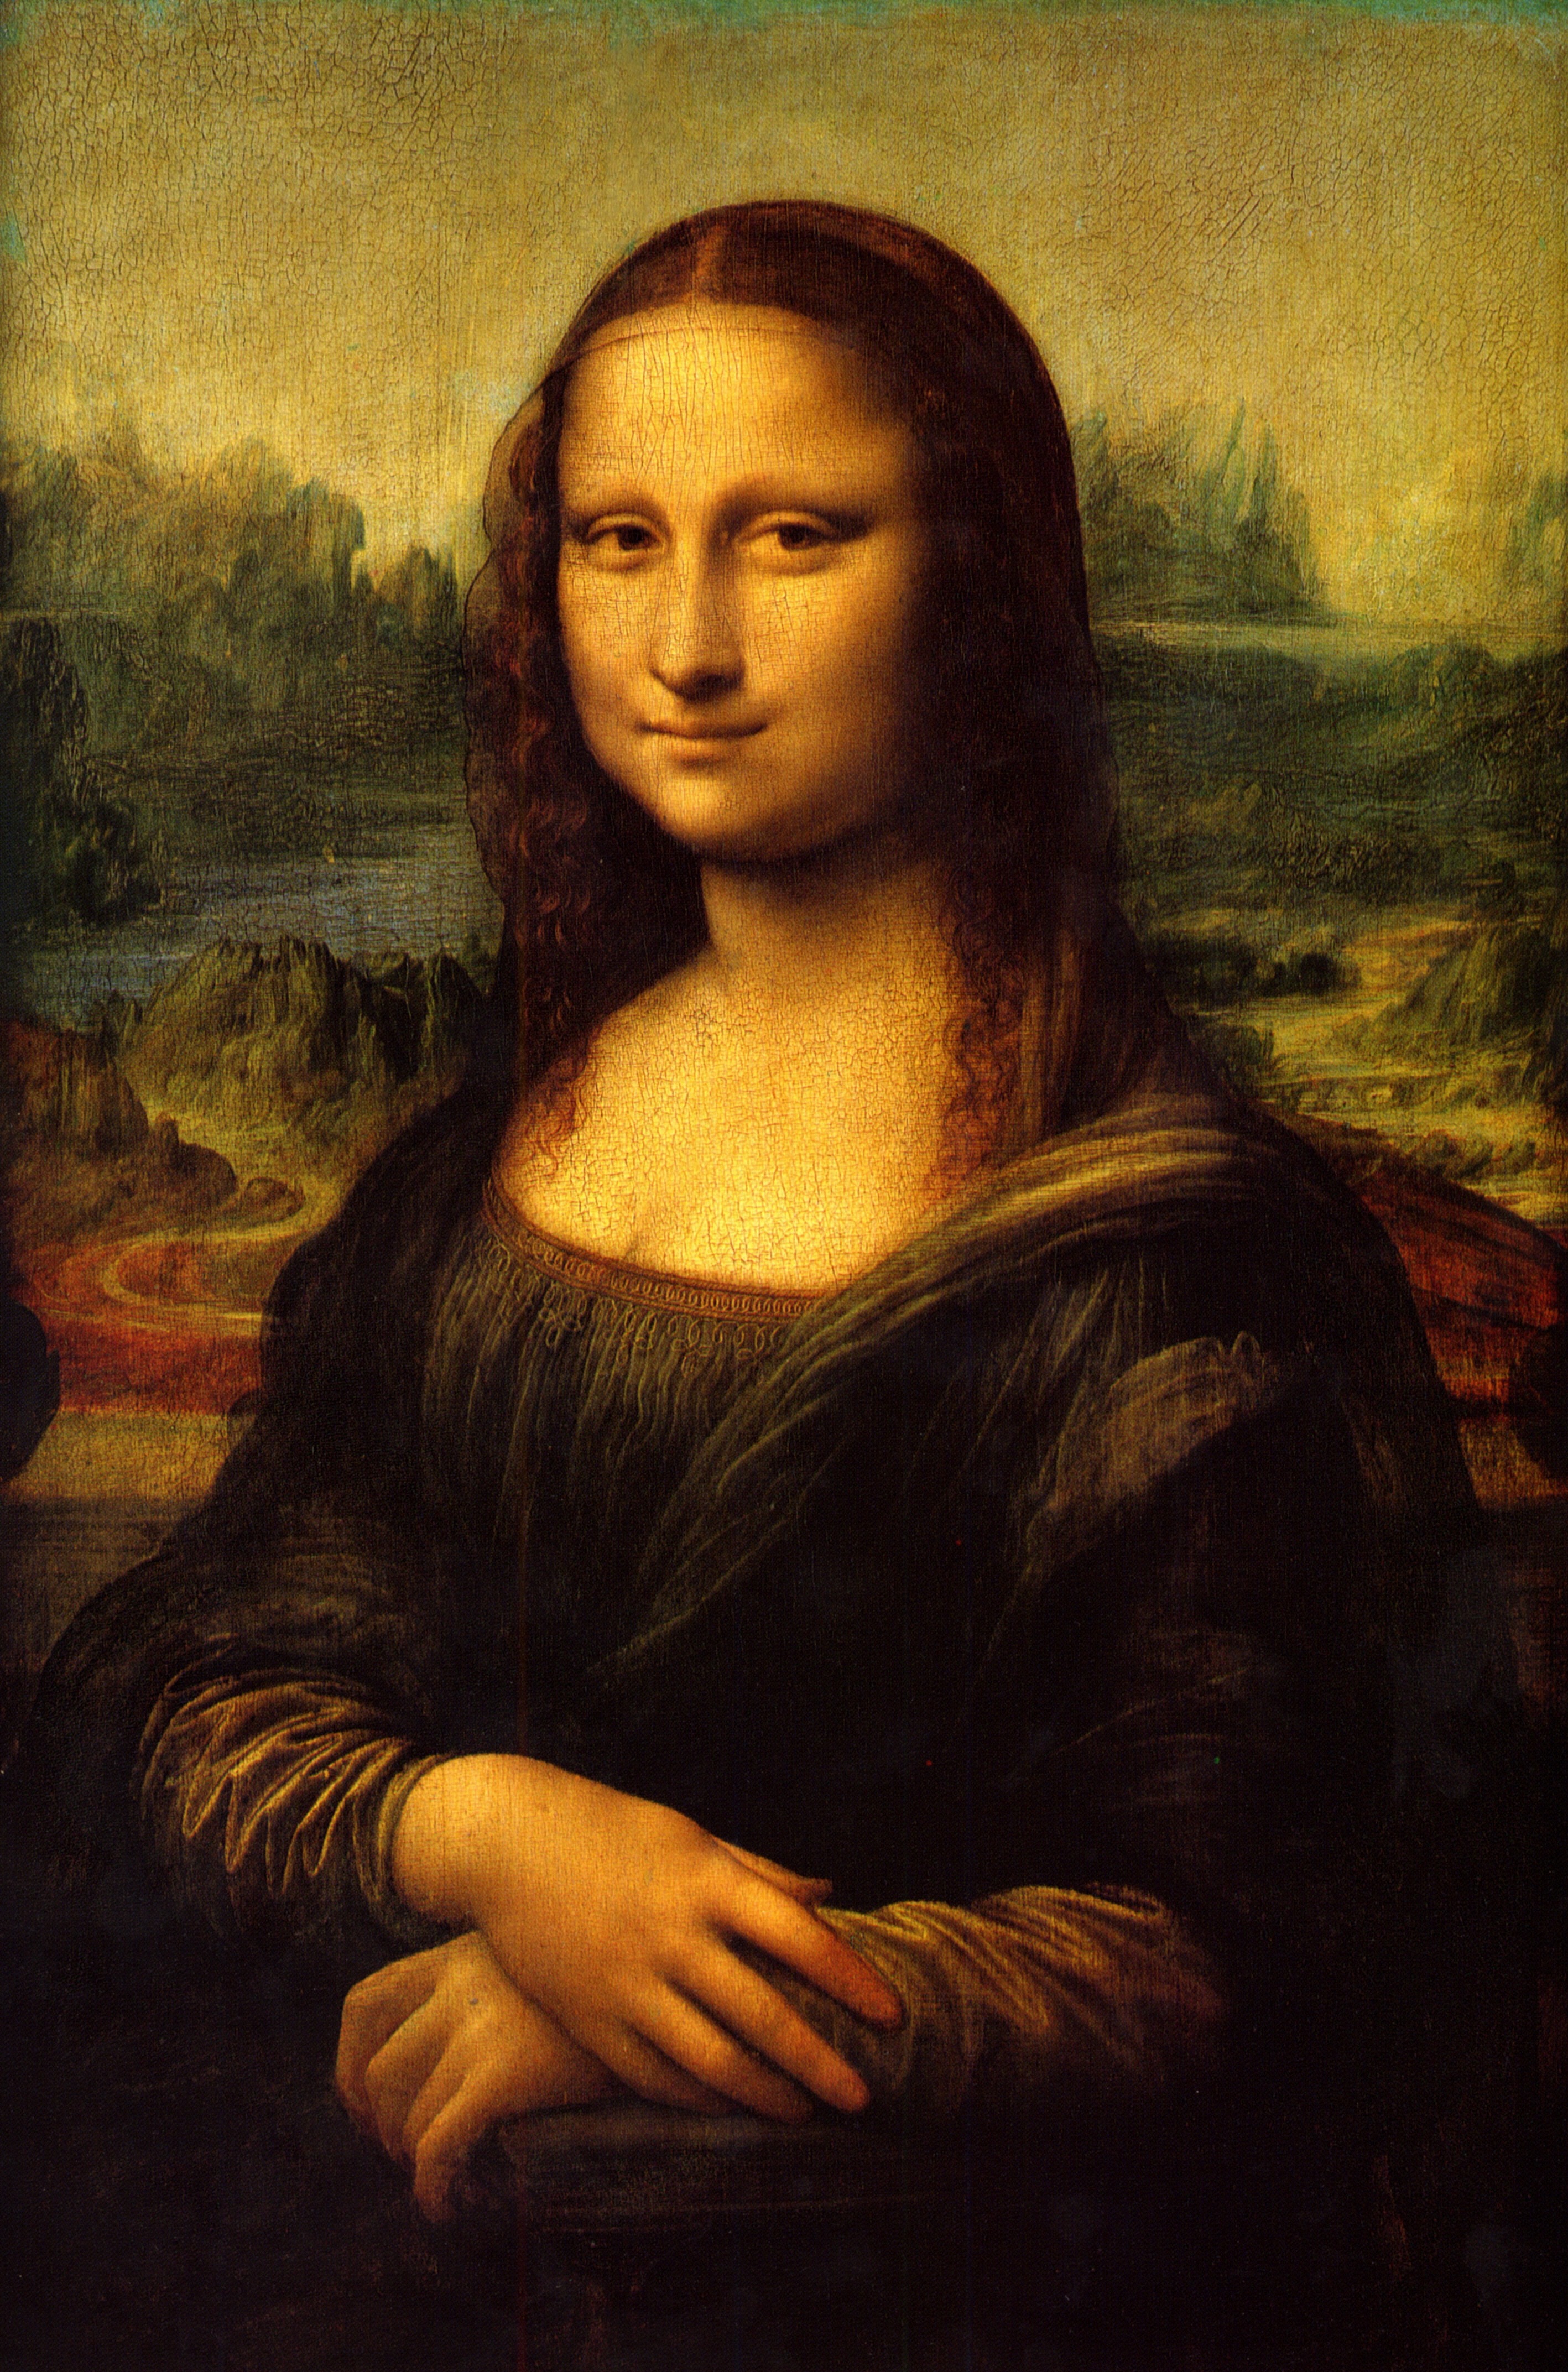 Want to know a Renaissance secret? Da Vinci worked on the Mona Lisa for years, but he never quite finished it to his own satisfaction. (Just don’t tell the 7 million visitors who go see the Mona Lisa in the Louvre Museum in Paris every year.) (Image via Wikipedia)  